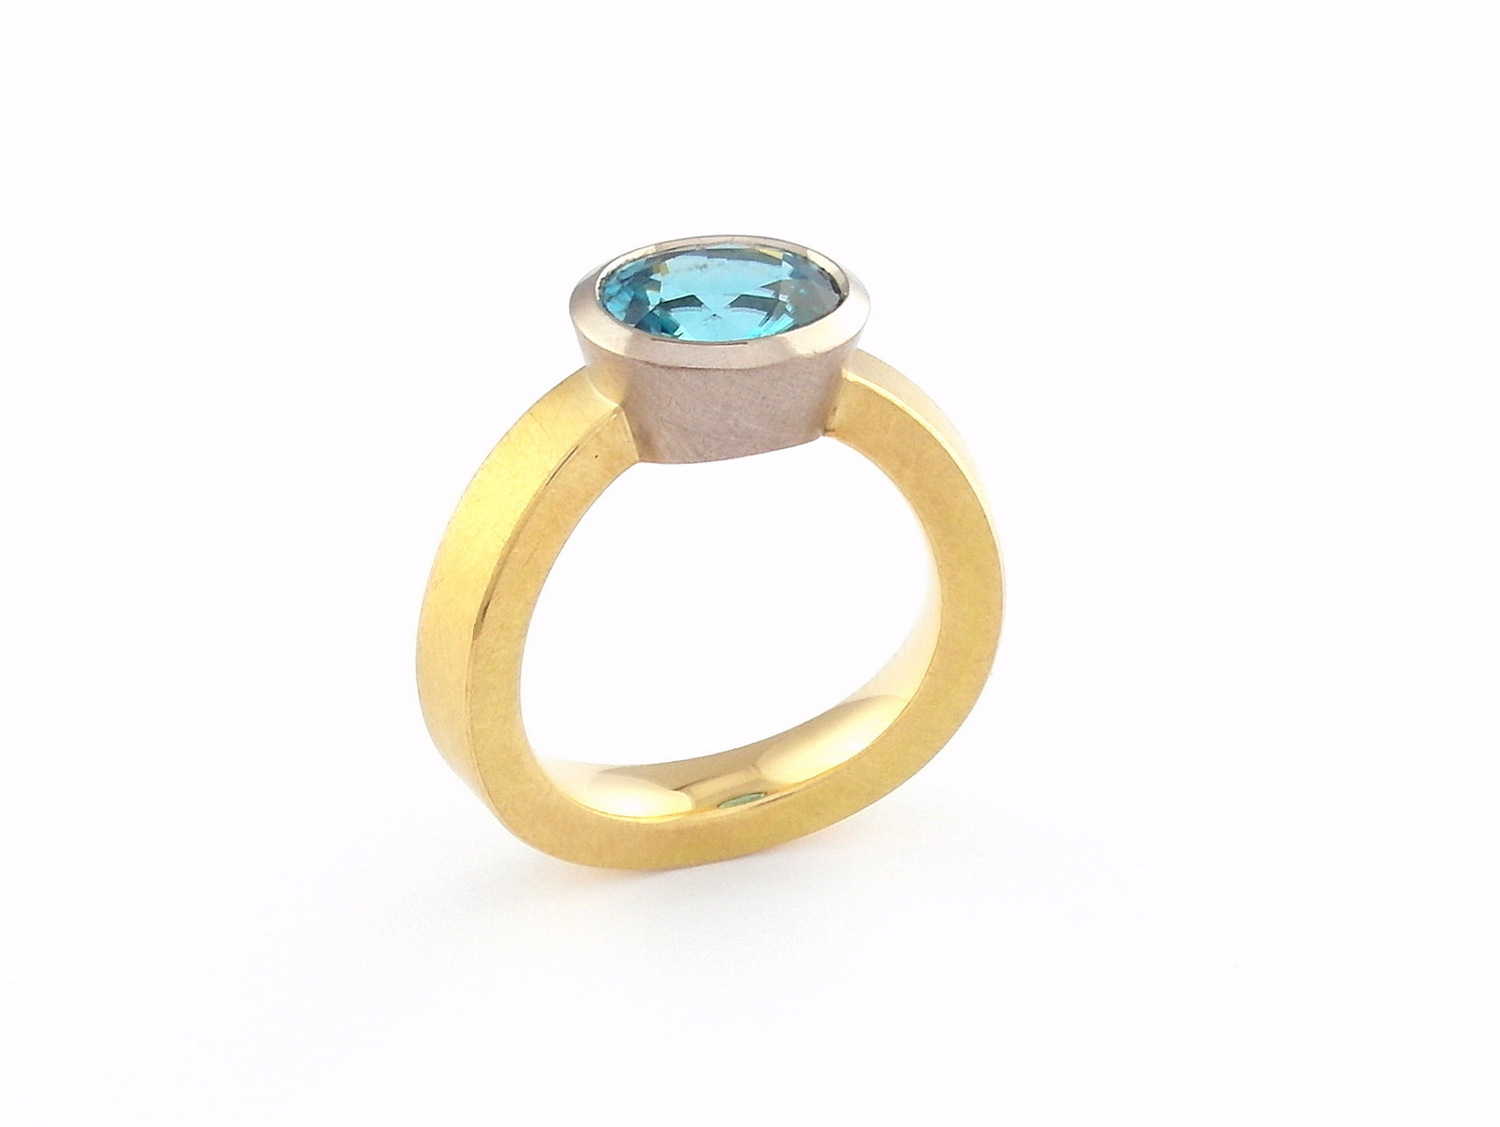  Peter's gold and zircon ring by Marcus Foley 2013 - 18ct yellow and white gold, oval cut zircon (Private collection) 